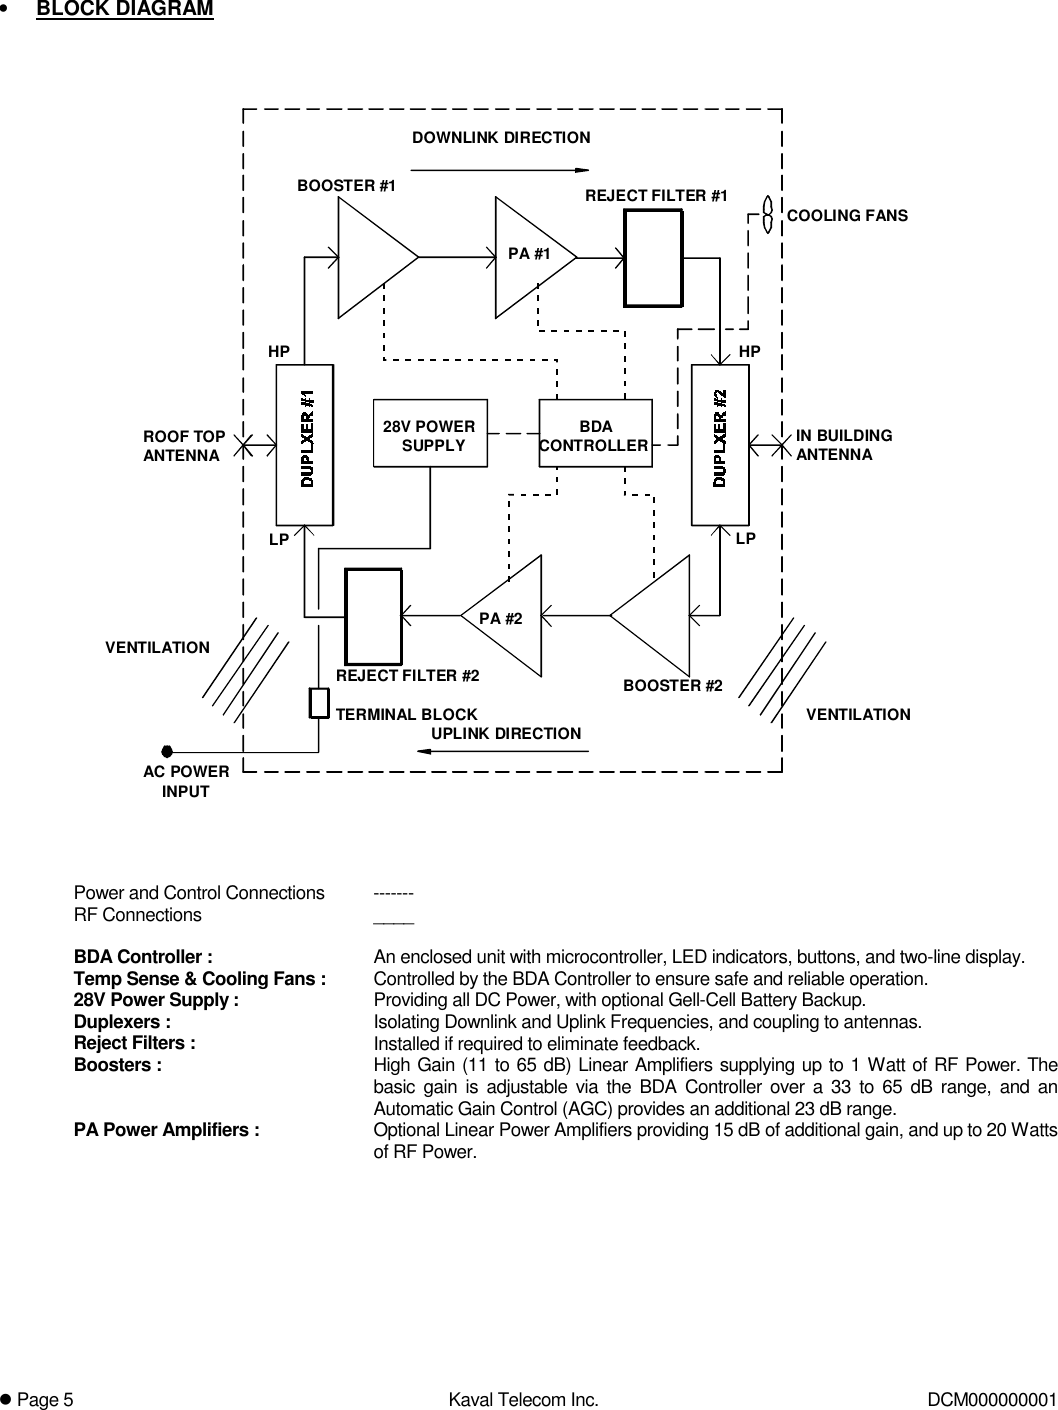 ! Page 5  Kaval Telecom Inc.  DCM000000001  •  BLOCK DIAGRAM  REJECT FILTER #2UPLINK DIRECTIONIN BUILDINGANTENNAHPANTENNACOOLING FANSVENTILATIONINPUTAC POWERTERMINAL BLOCKVENTILATIONBDASUPPLY28V POWER CONTROLLERROOF TOPHPLPLPDOWNLINK DIRECTIONPA #1REJECT FILTER #1PA #2BOOSTER #1BOOSTER #2     Power and Control Connections  -------  RF Connections   ____  BDA Controller :  An enclosed unit with microcontroller, LED indicators, buttons, and two-line display. Temp Sense &amp; Cooling Fans :  Controlled by the BDA Controller to ensure safe and reliable operation. 28V Power Supply :  Providing all DC Power, with optional Gell-Cell Battery Backup. Duplexers :  Isolating Downlink and Uplink Frequencies, and coupling to antennas. Reject Filters :  Installed if required to eliminate feedback. Boosters :  High Gain (11 to 65 dB) Linear Amplifiers supplying up to 1 Watt of RF Power. The basic gain is adjustable via the BDA Controller over a 33 to 65 dB range, and an Automatic Gain Control (AGC) provides an additional 23 dB range. PA Power Amplifiers :  Optional Linear Power Amplifiers providing 15 dB of additional gain, and up to 20 Watts of RF Power. 